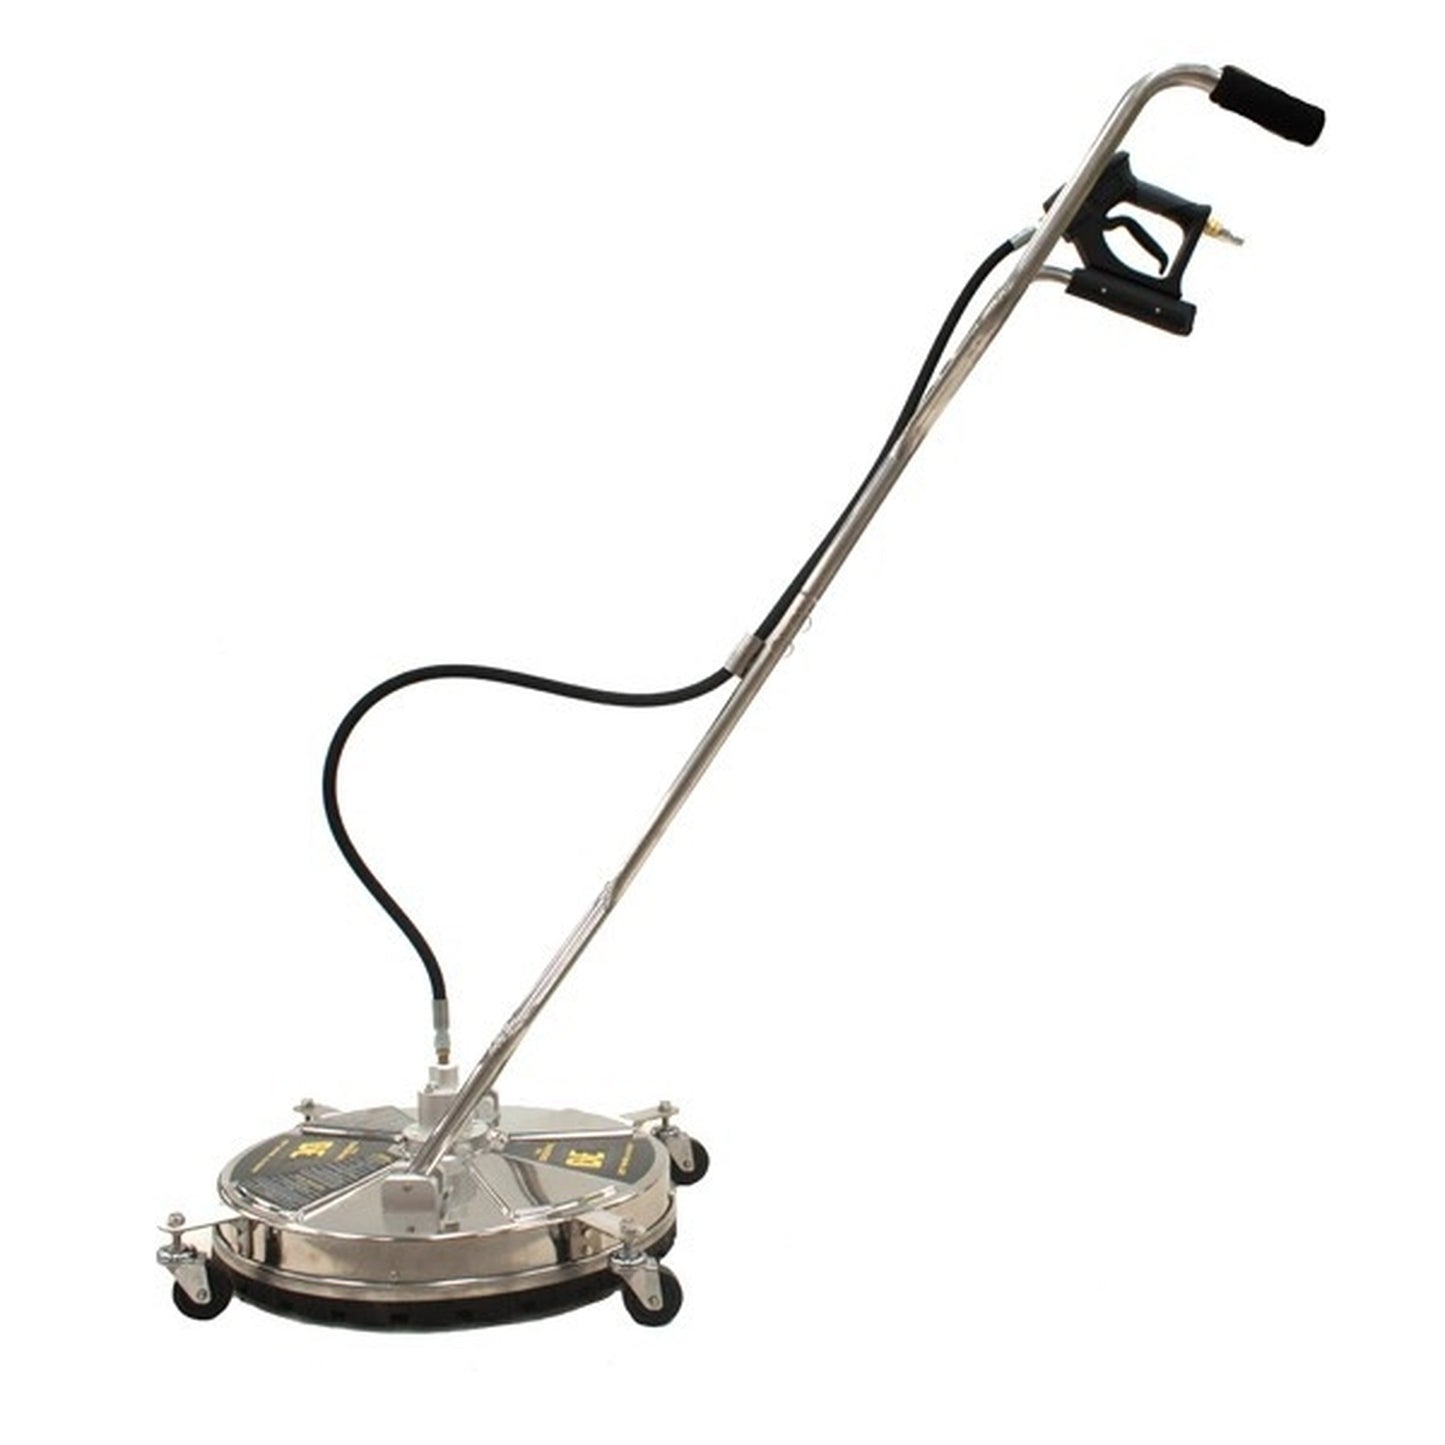 BE Pressure 85.403.009 Whirlaway Stainless Steel Flat Surface Cleaner